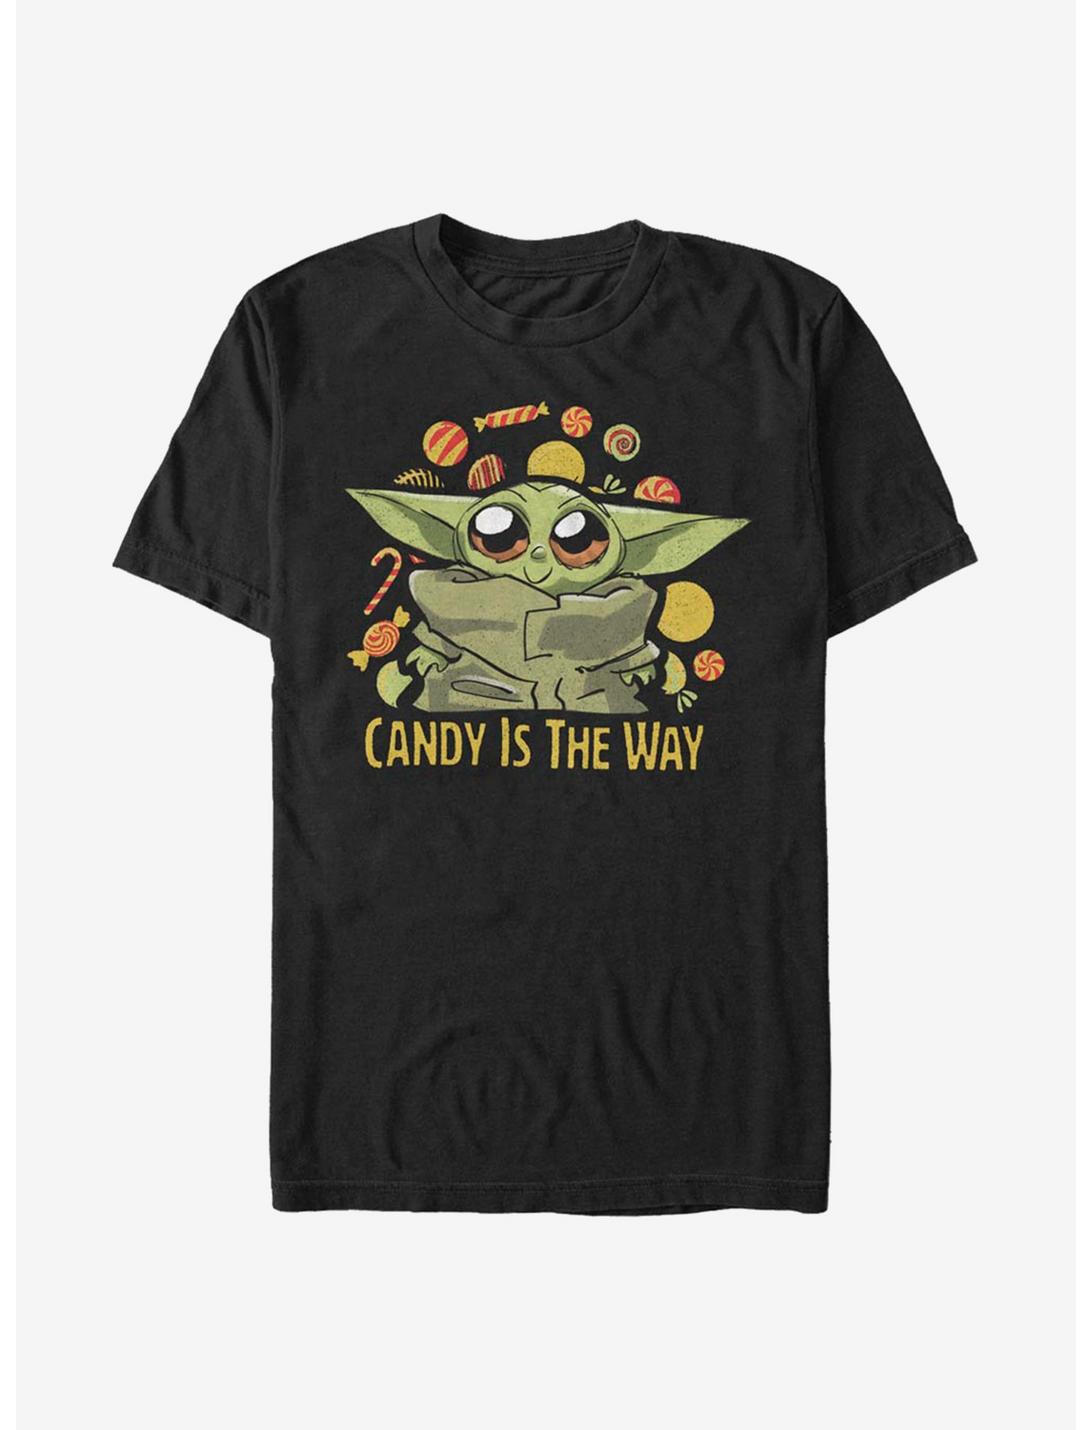 Star Wars The Mandalorian Candy Is The Way The Child T-Shirt, BLACK, hi-res